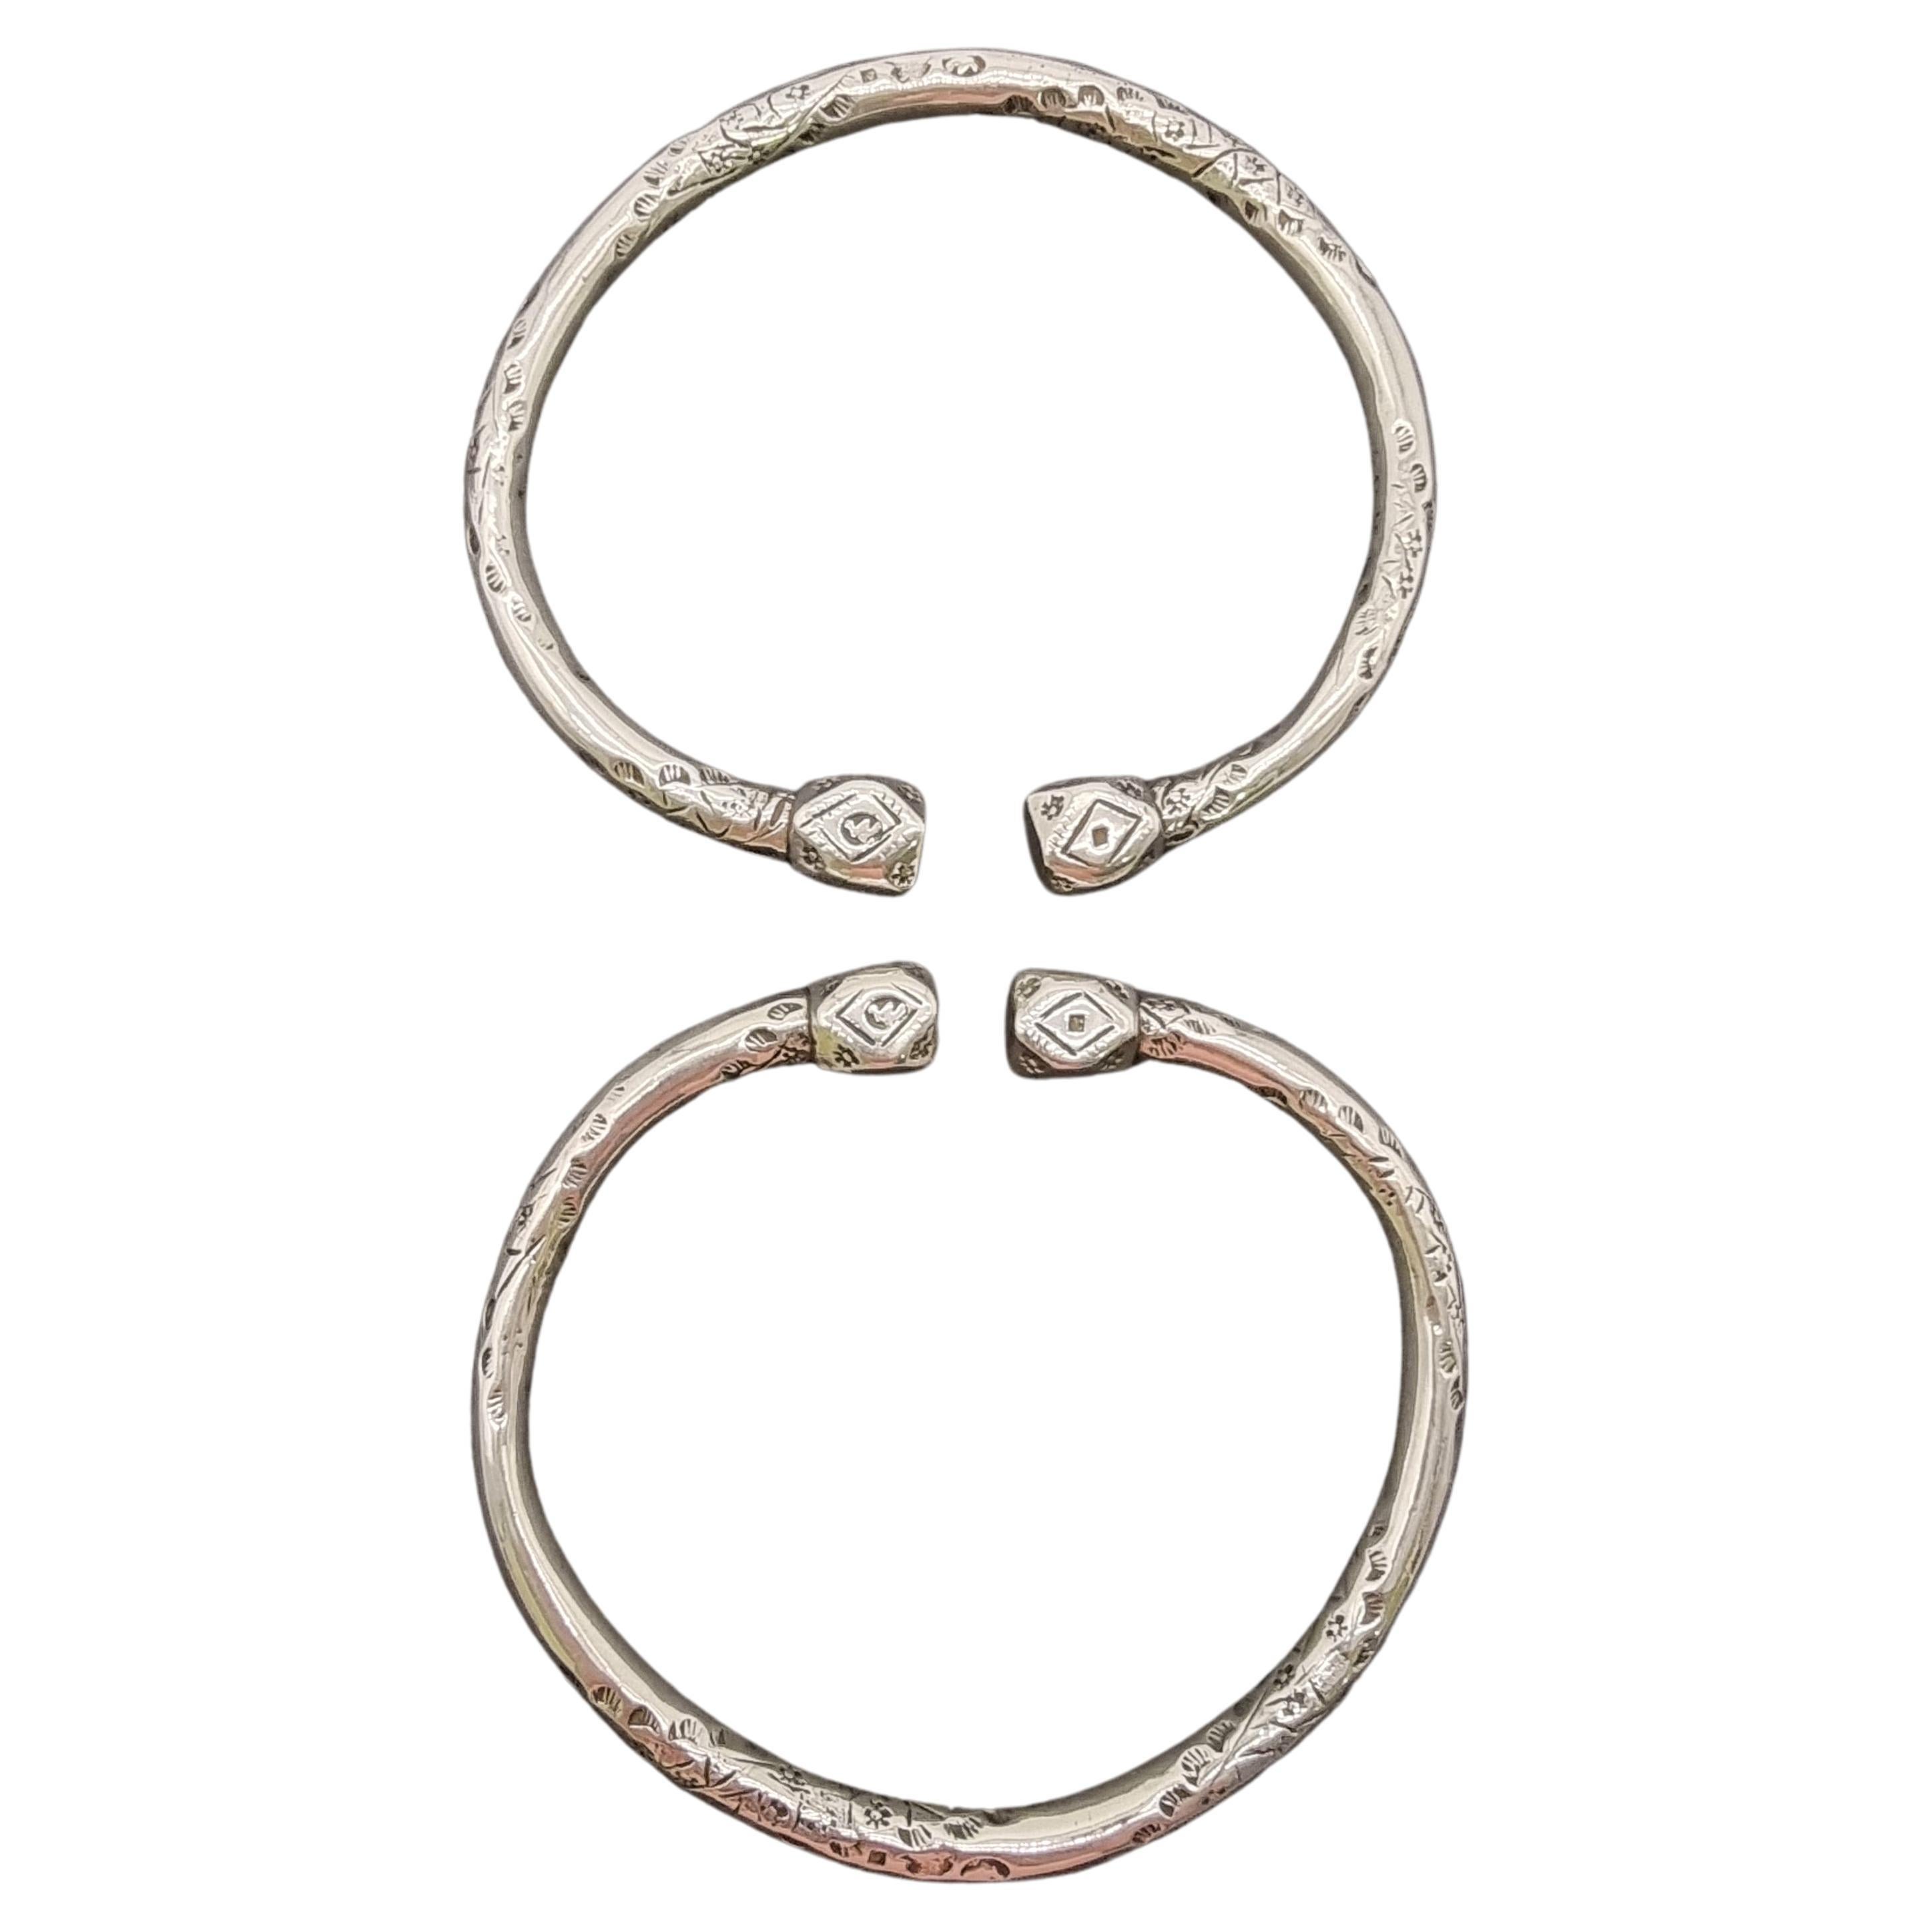 A pair of 19th century Portuguese solid silver arm bracelets